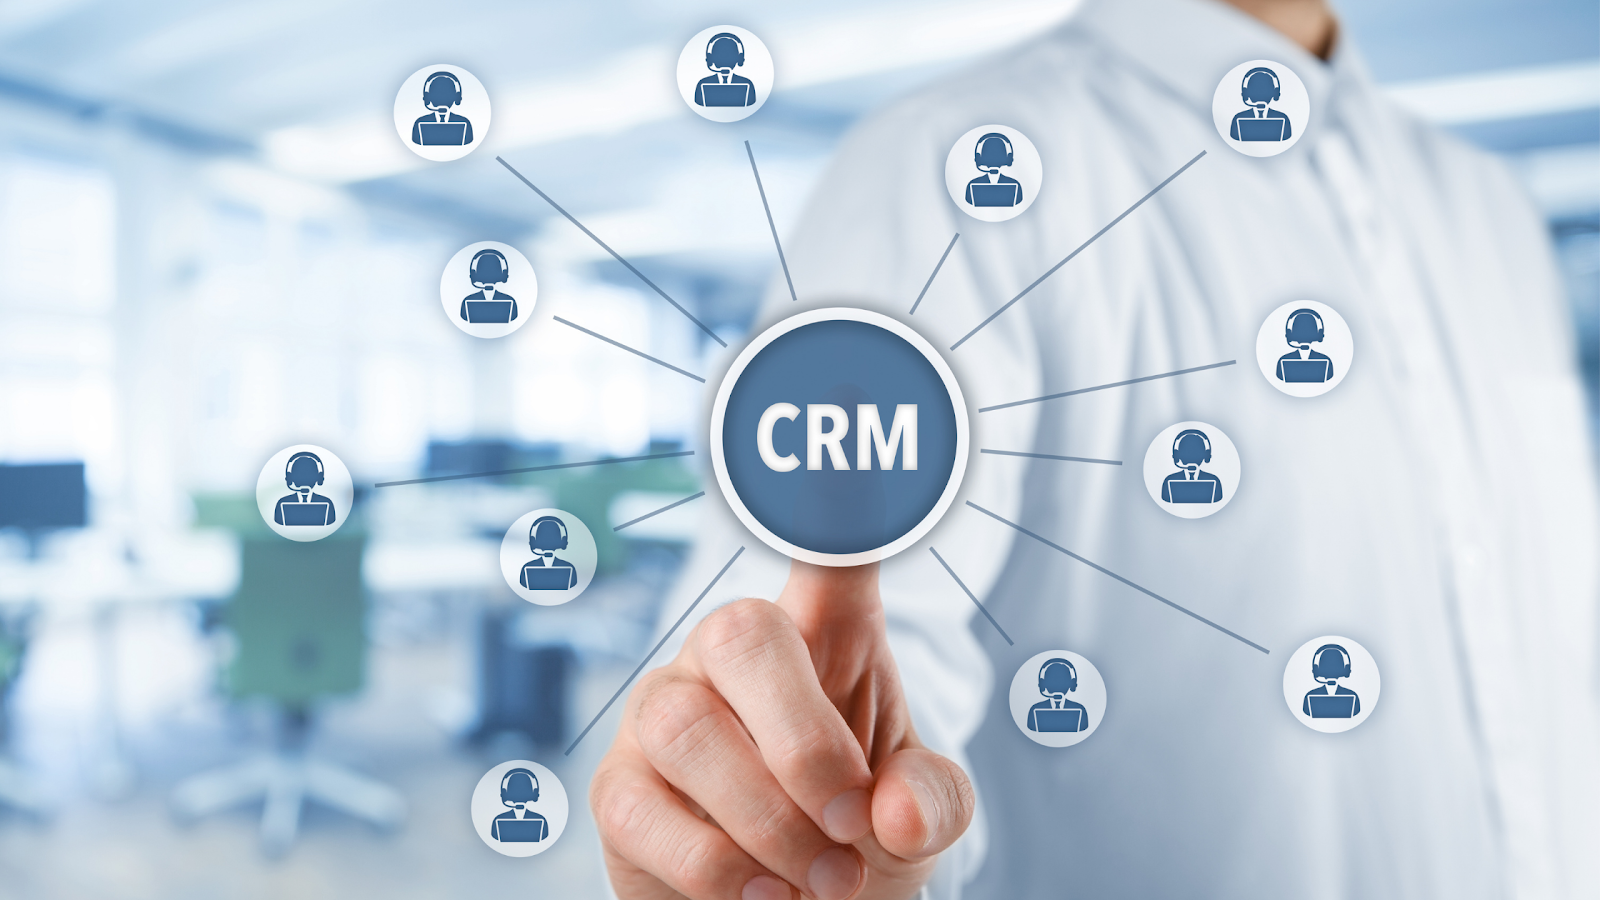 3 Reasons Why You Should Use a CRM